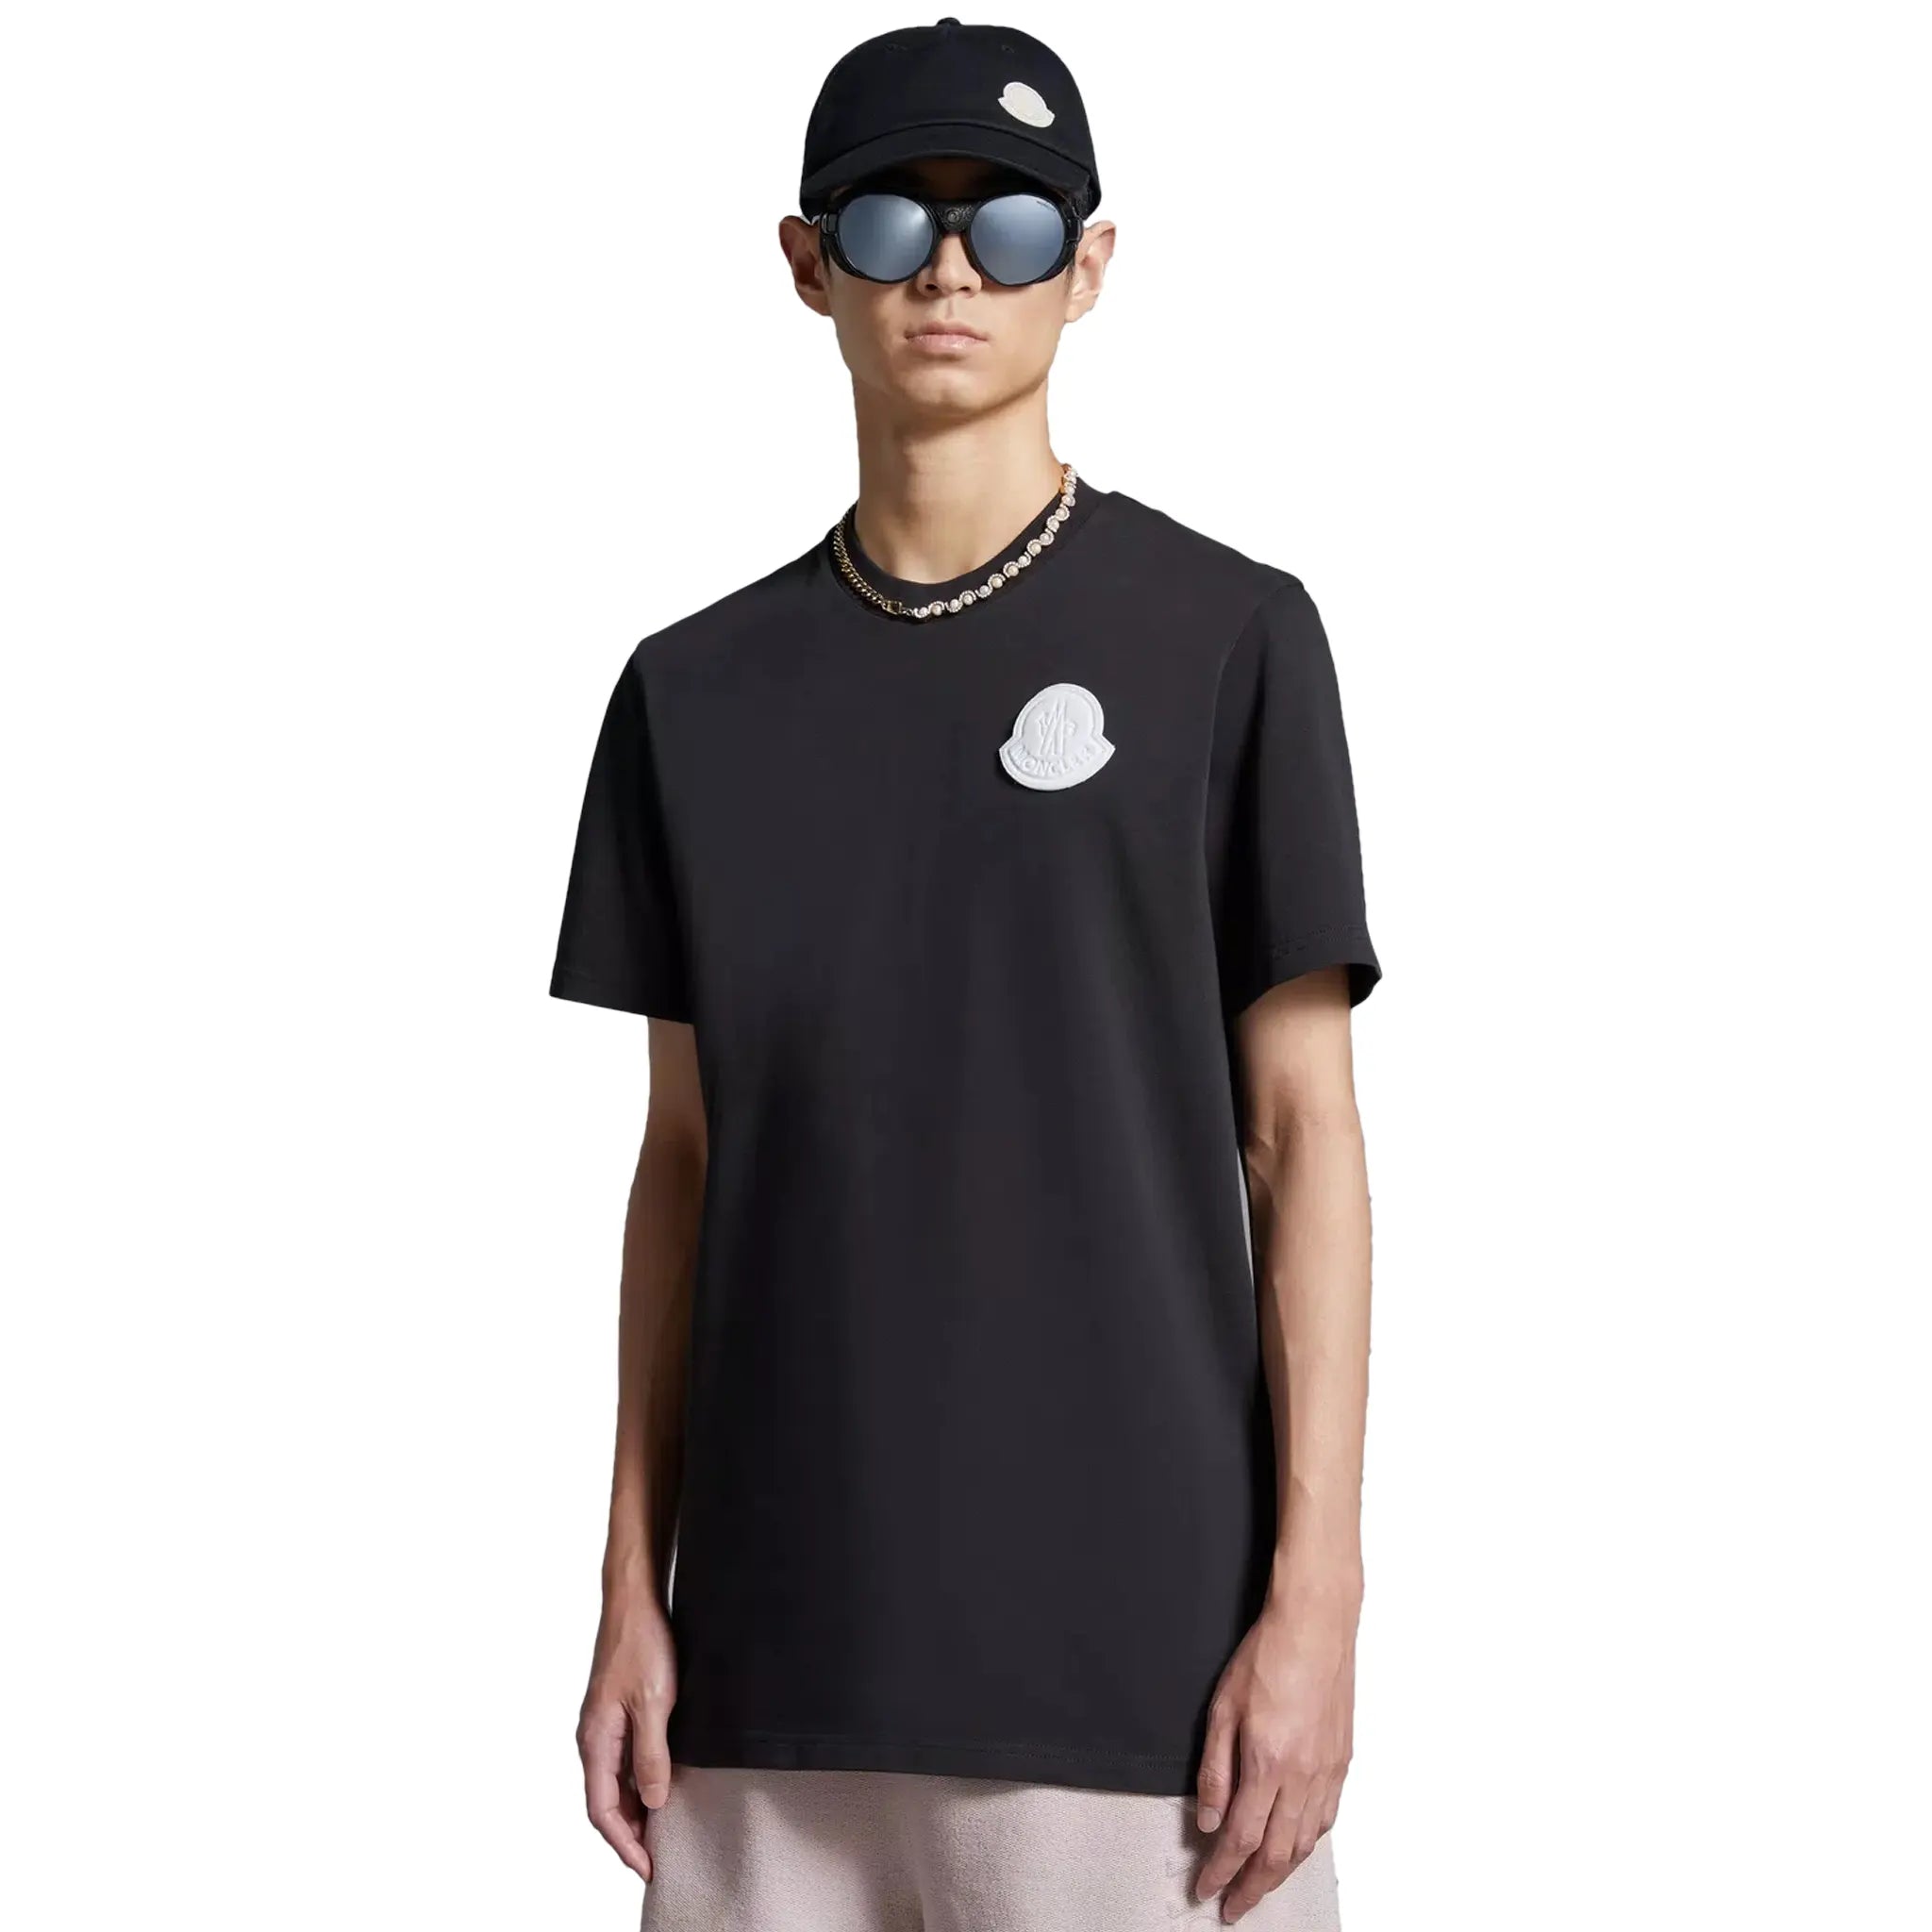 Model view of Moncler SN44 Patched Logo Short Sleeve Charcoal T Shirt J10918C0004583927998